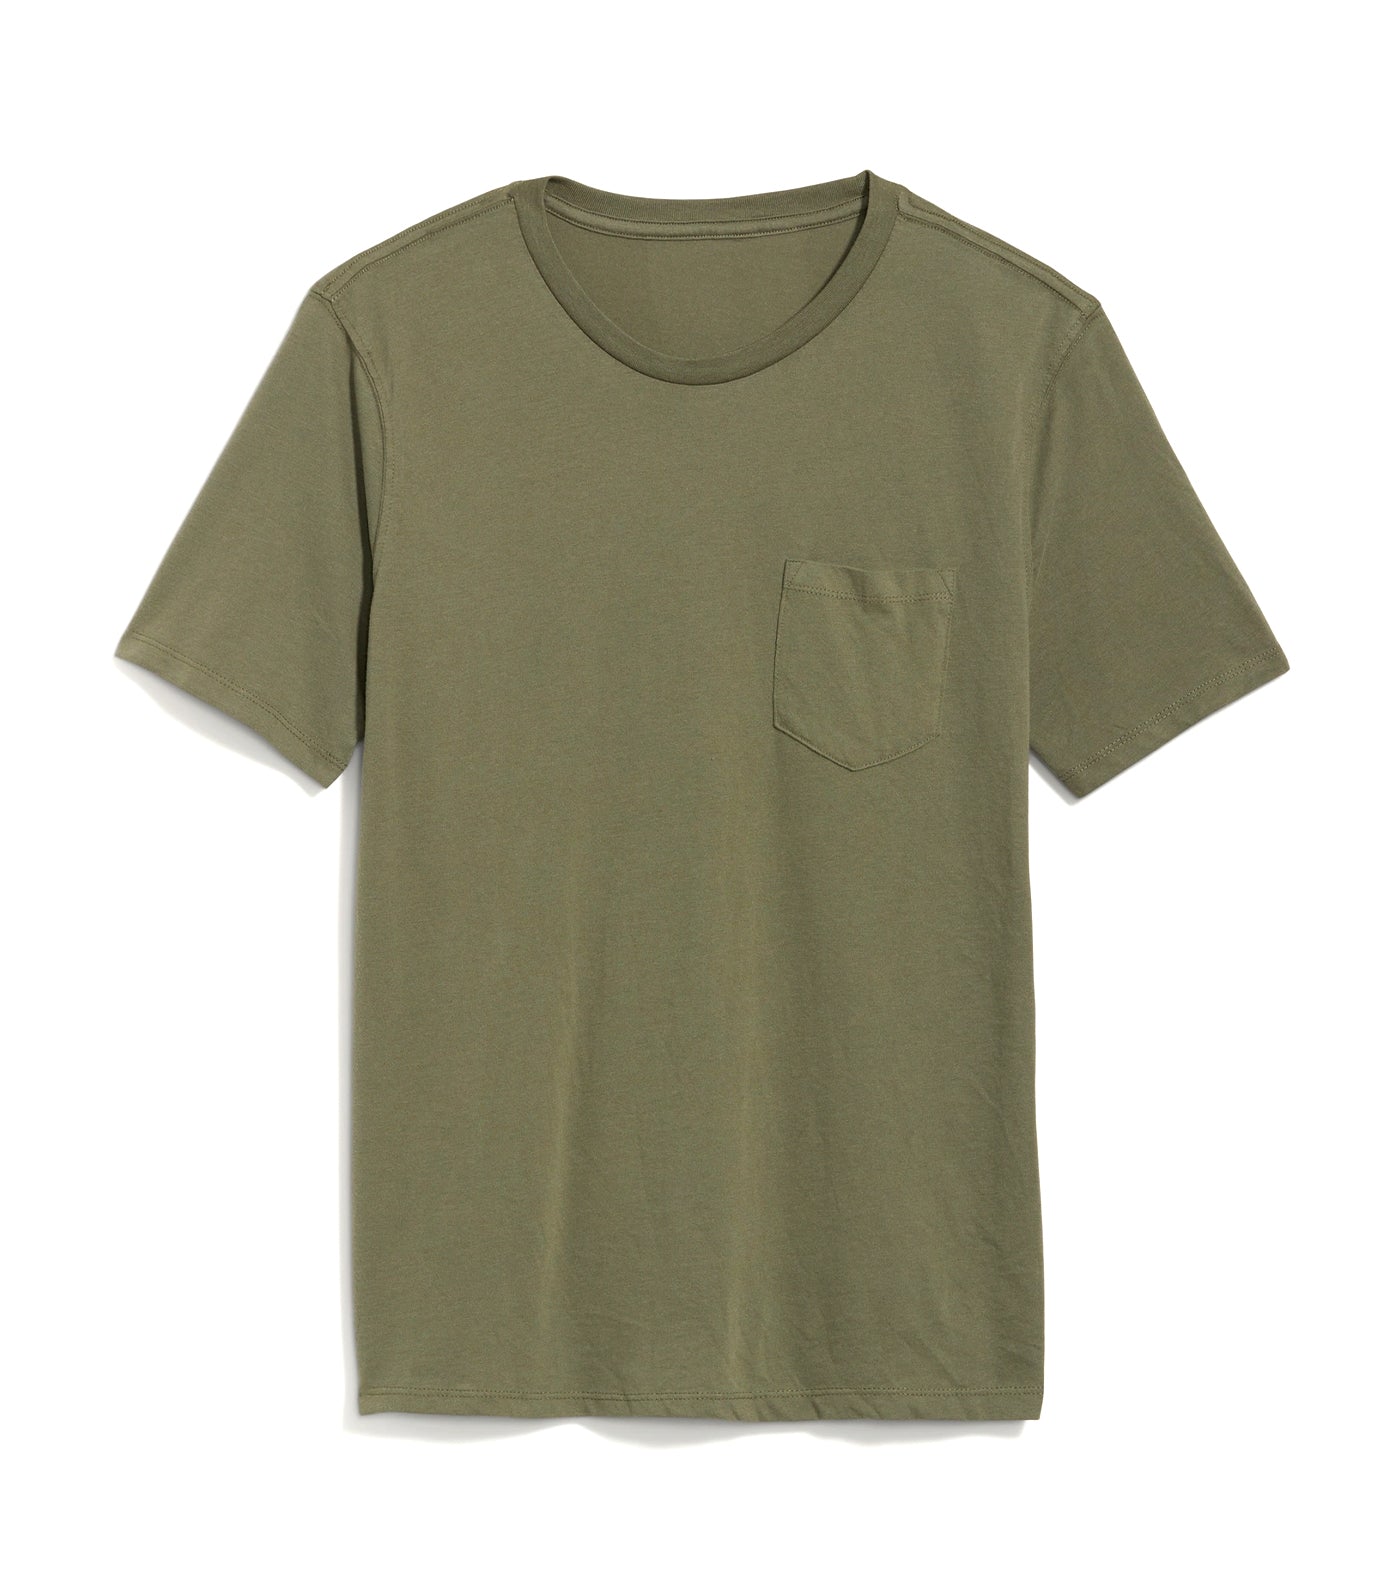 Soft-Washed Chest-Pocket Crew-Neck T-Shirt for Men Alpine Tundra